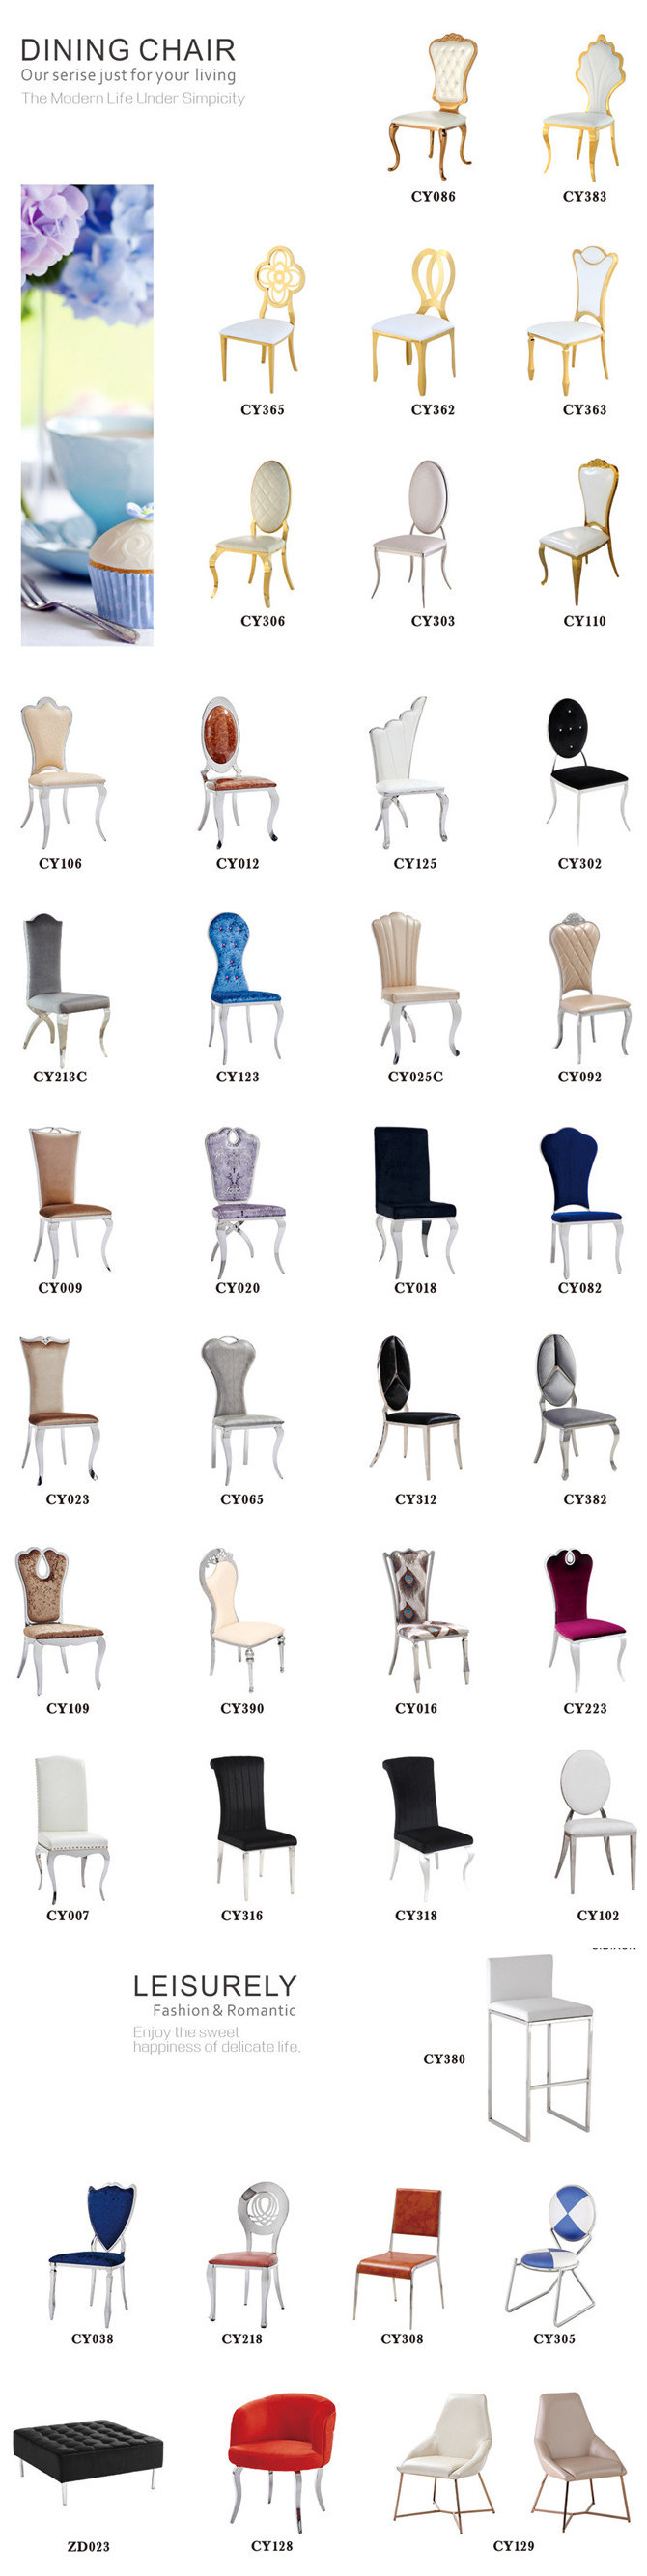 Oval Back PU Leather Stainless Steel Hotel Dining Chair Cy306